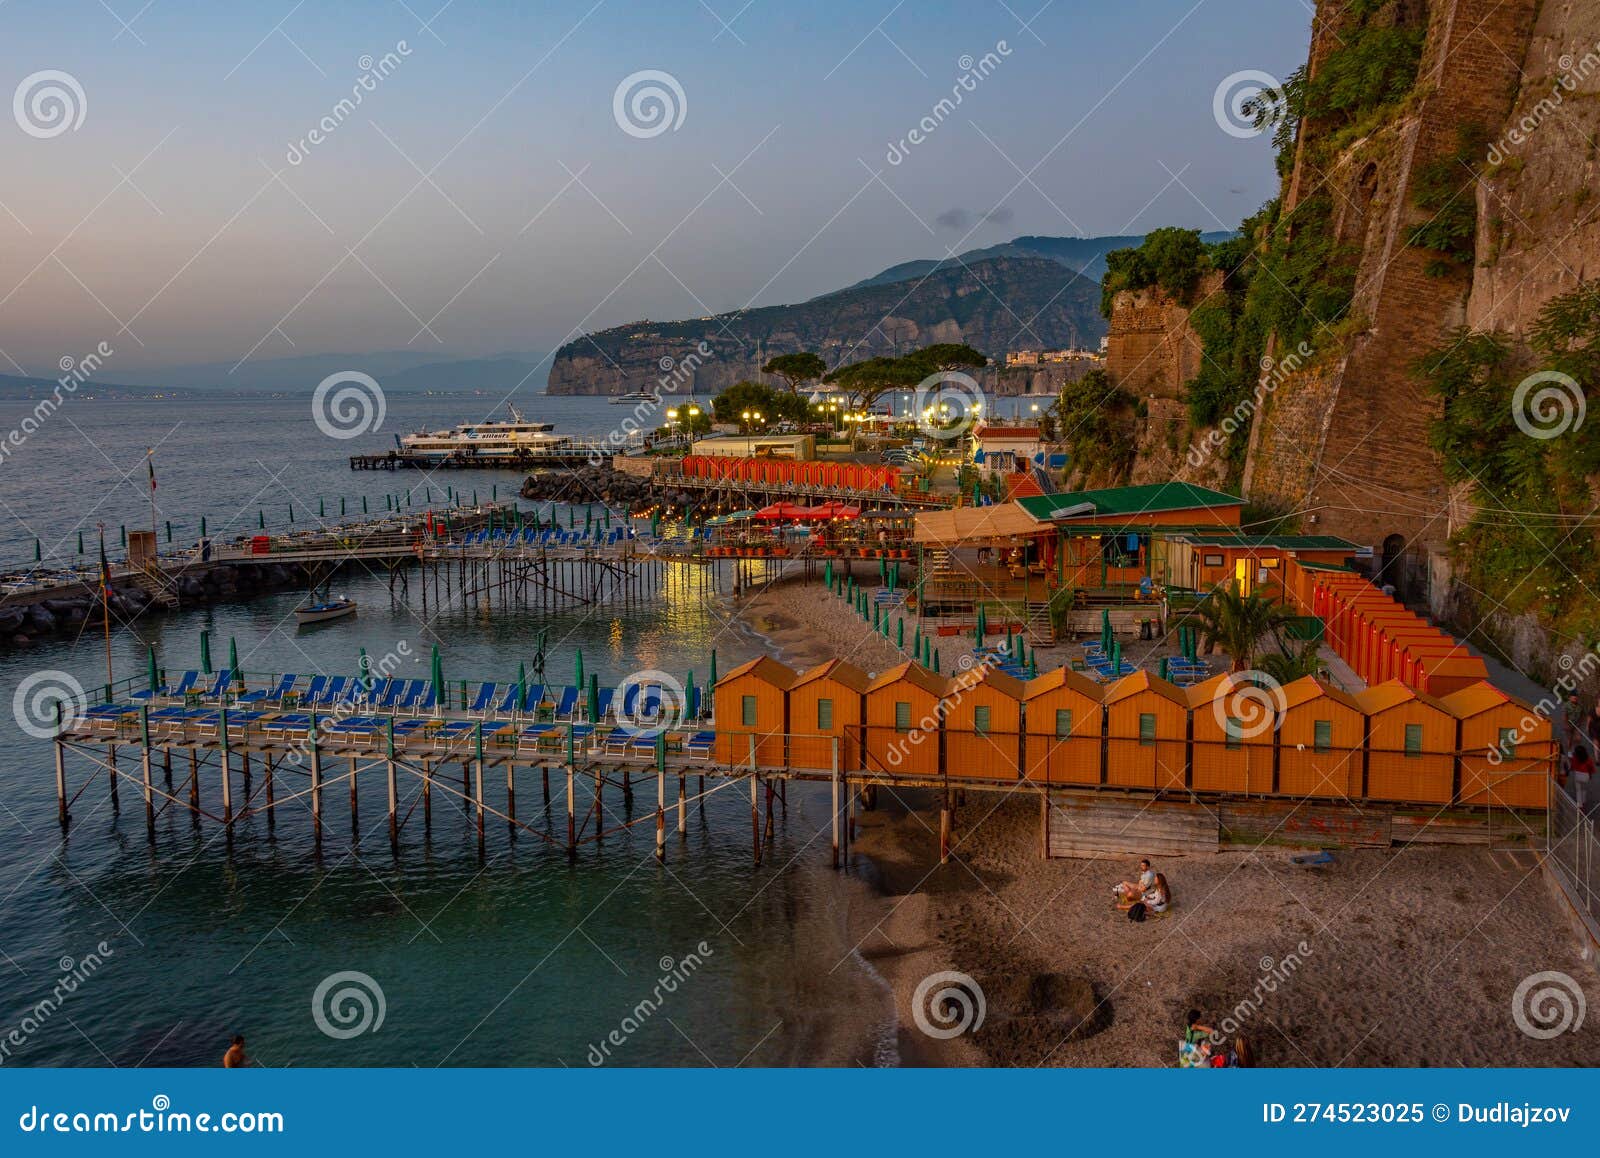 Night Aerial View of Leonelli S Beach at Sorrento, Italy Stock Image ...